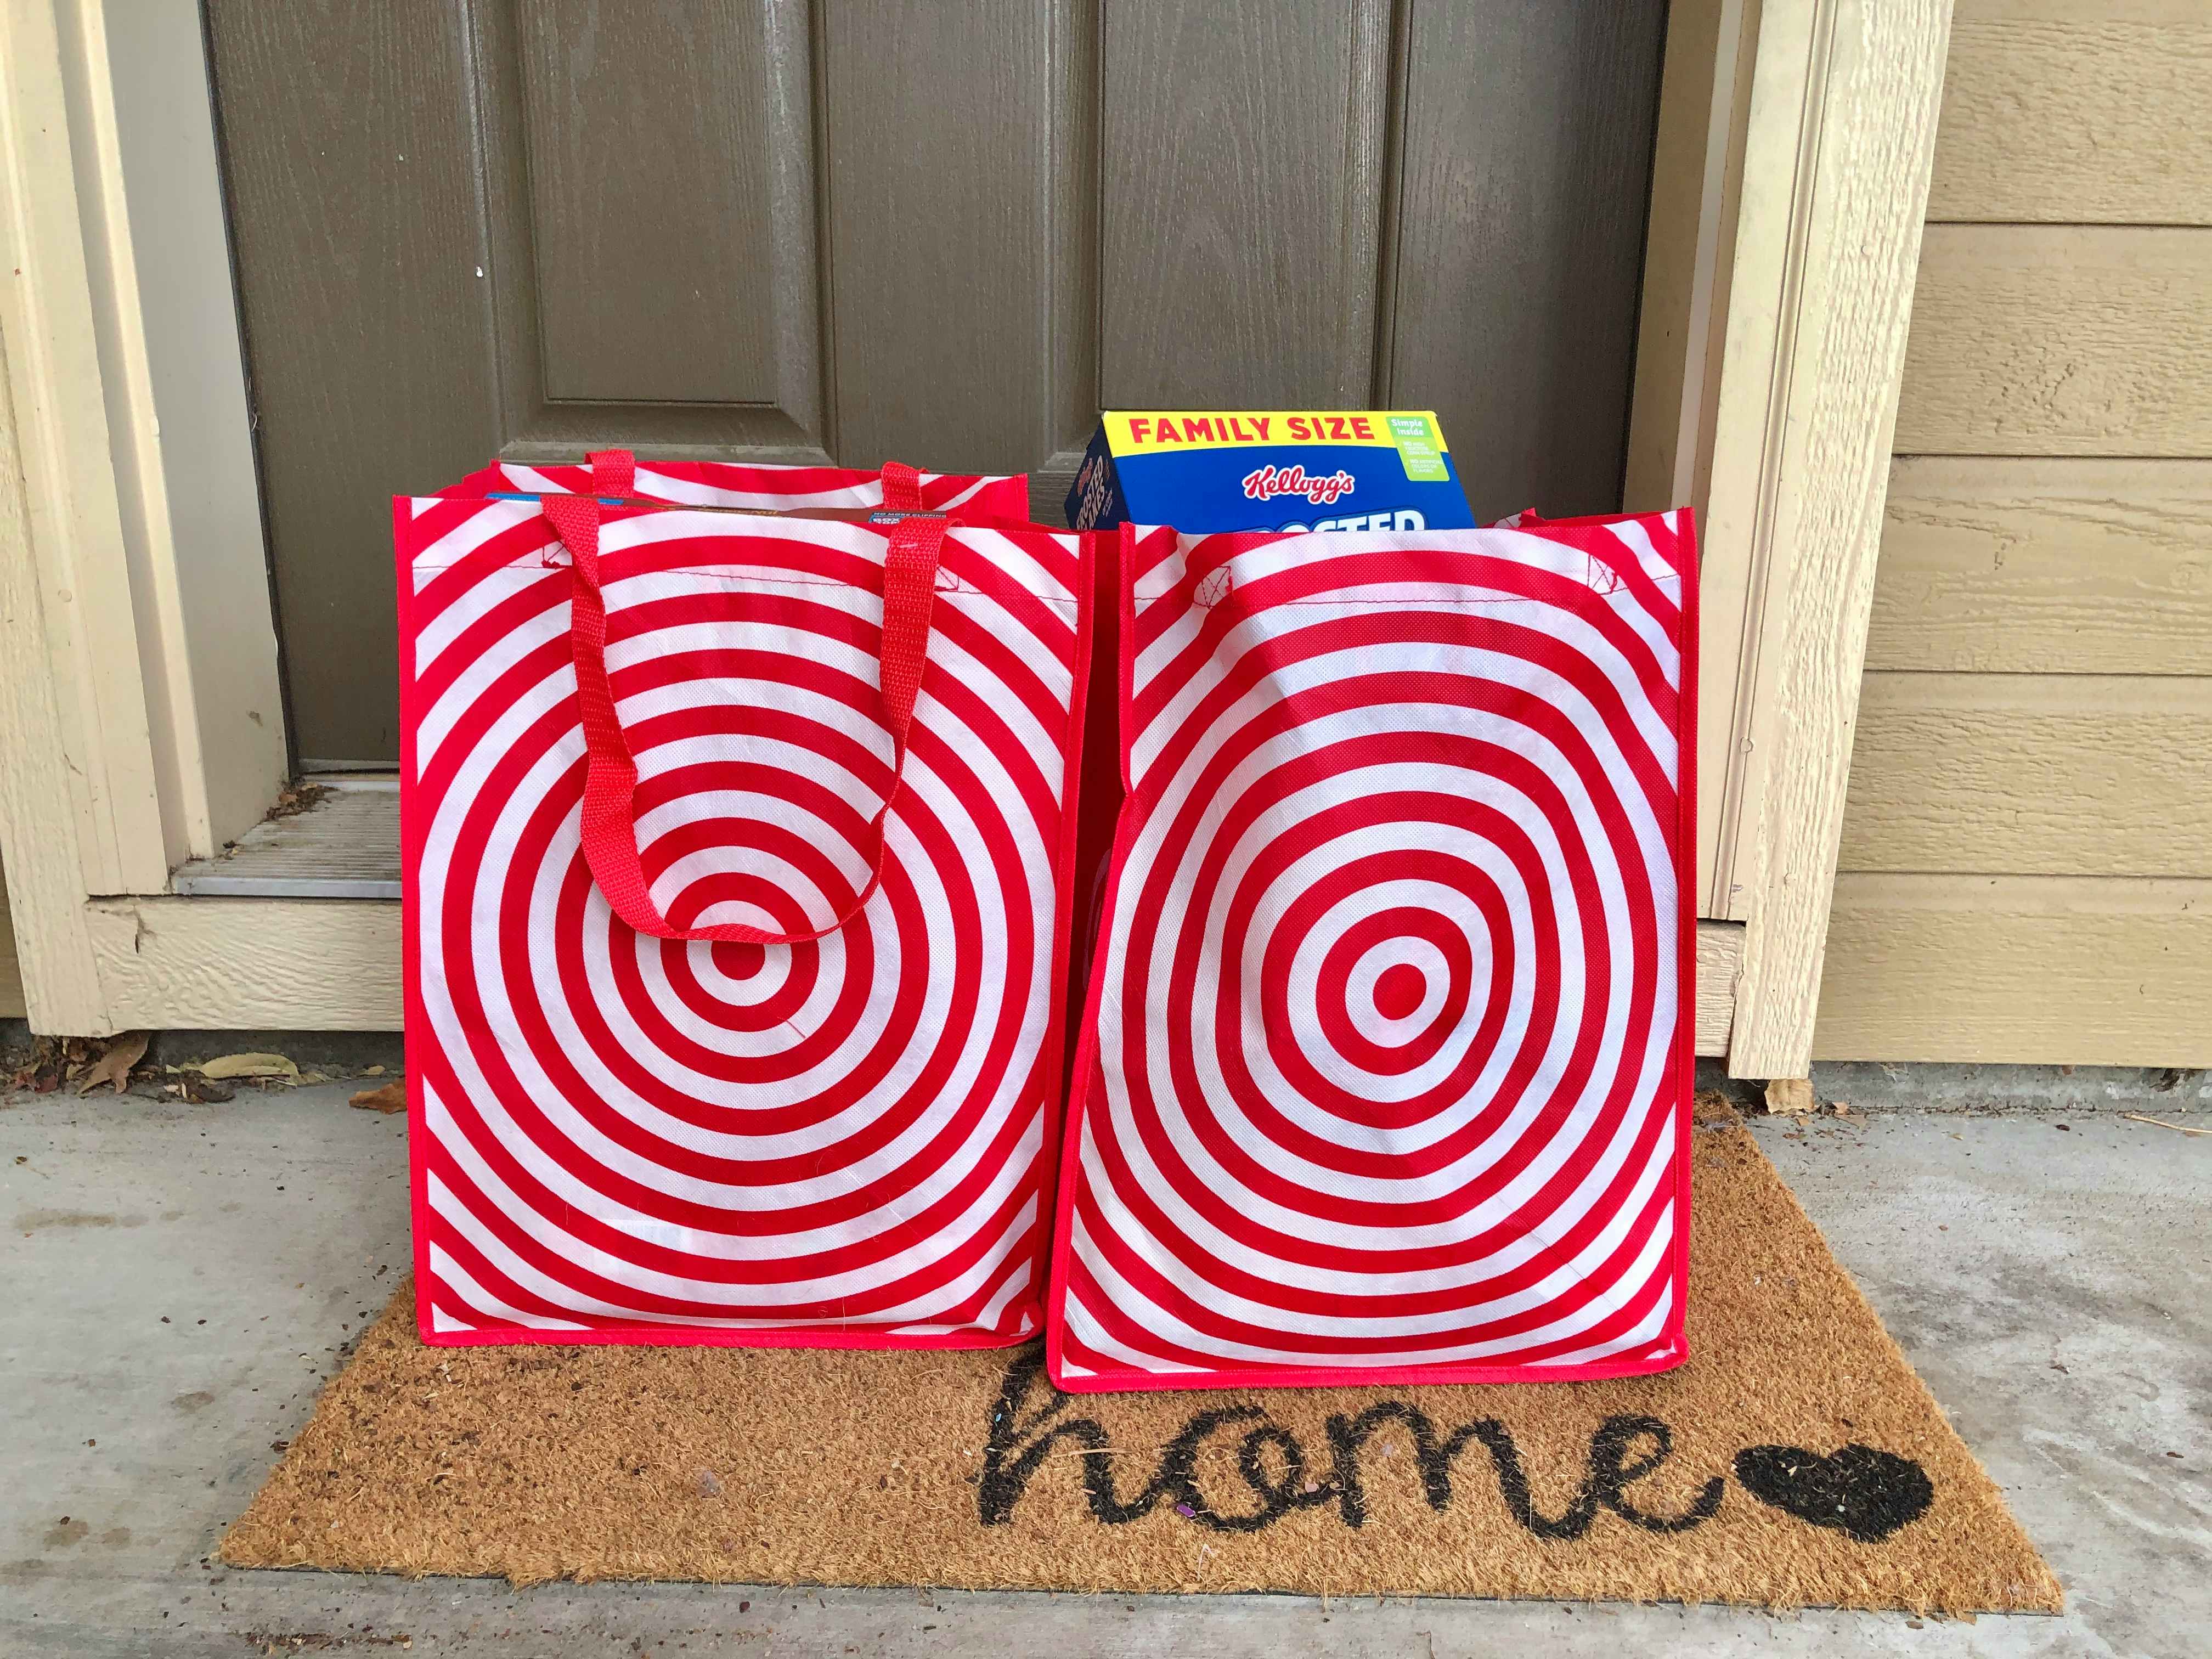 Your Guide to Target Same-Day Grocery Delivery - The Krazy Coupon Lady